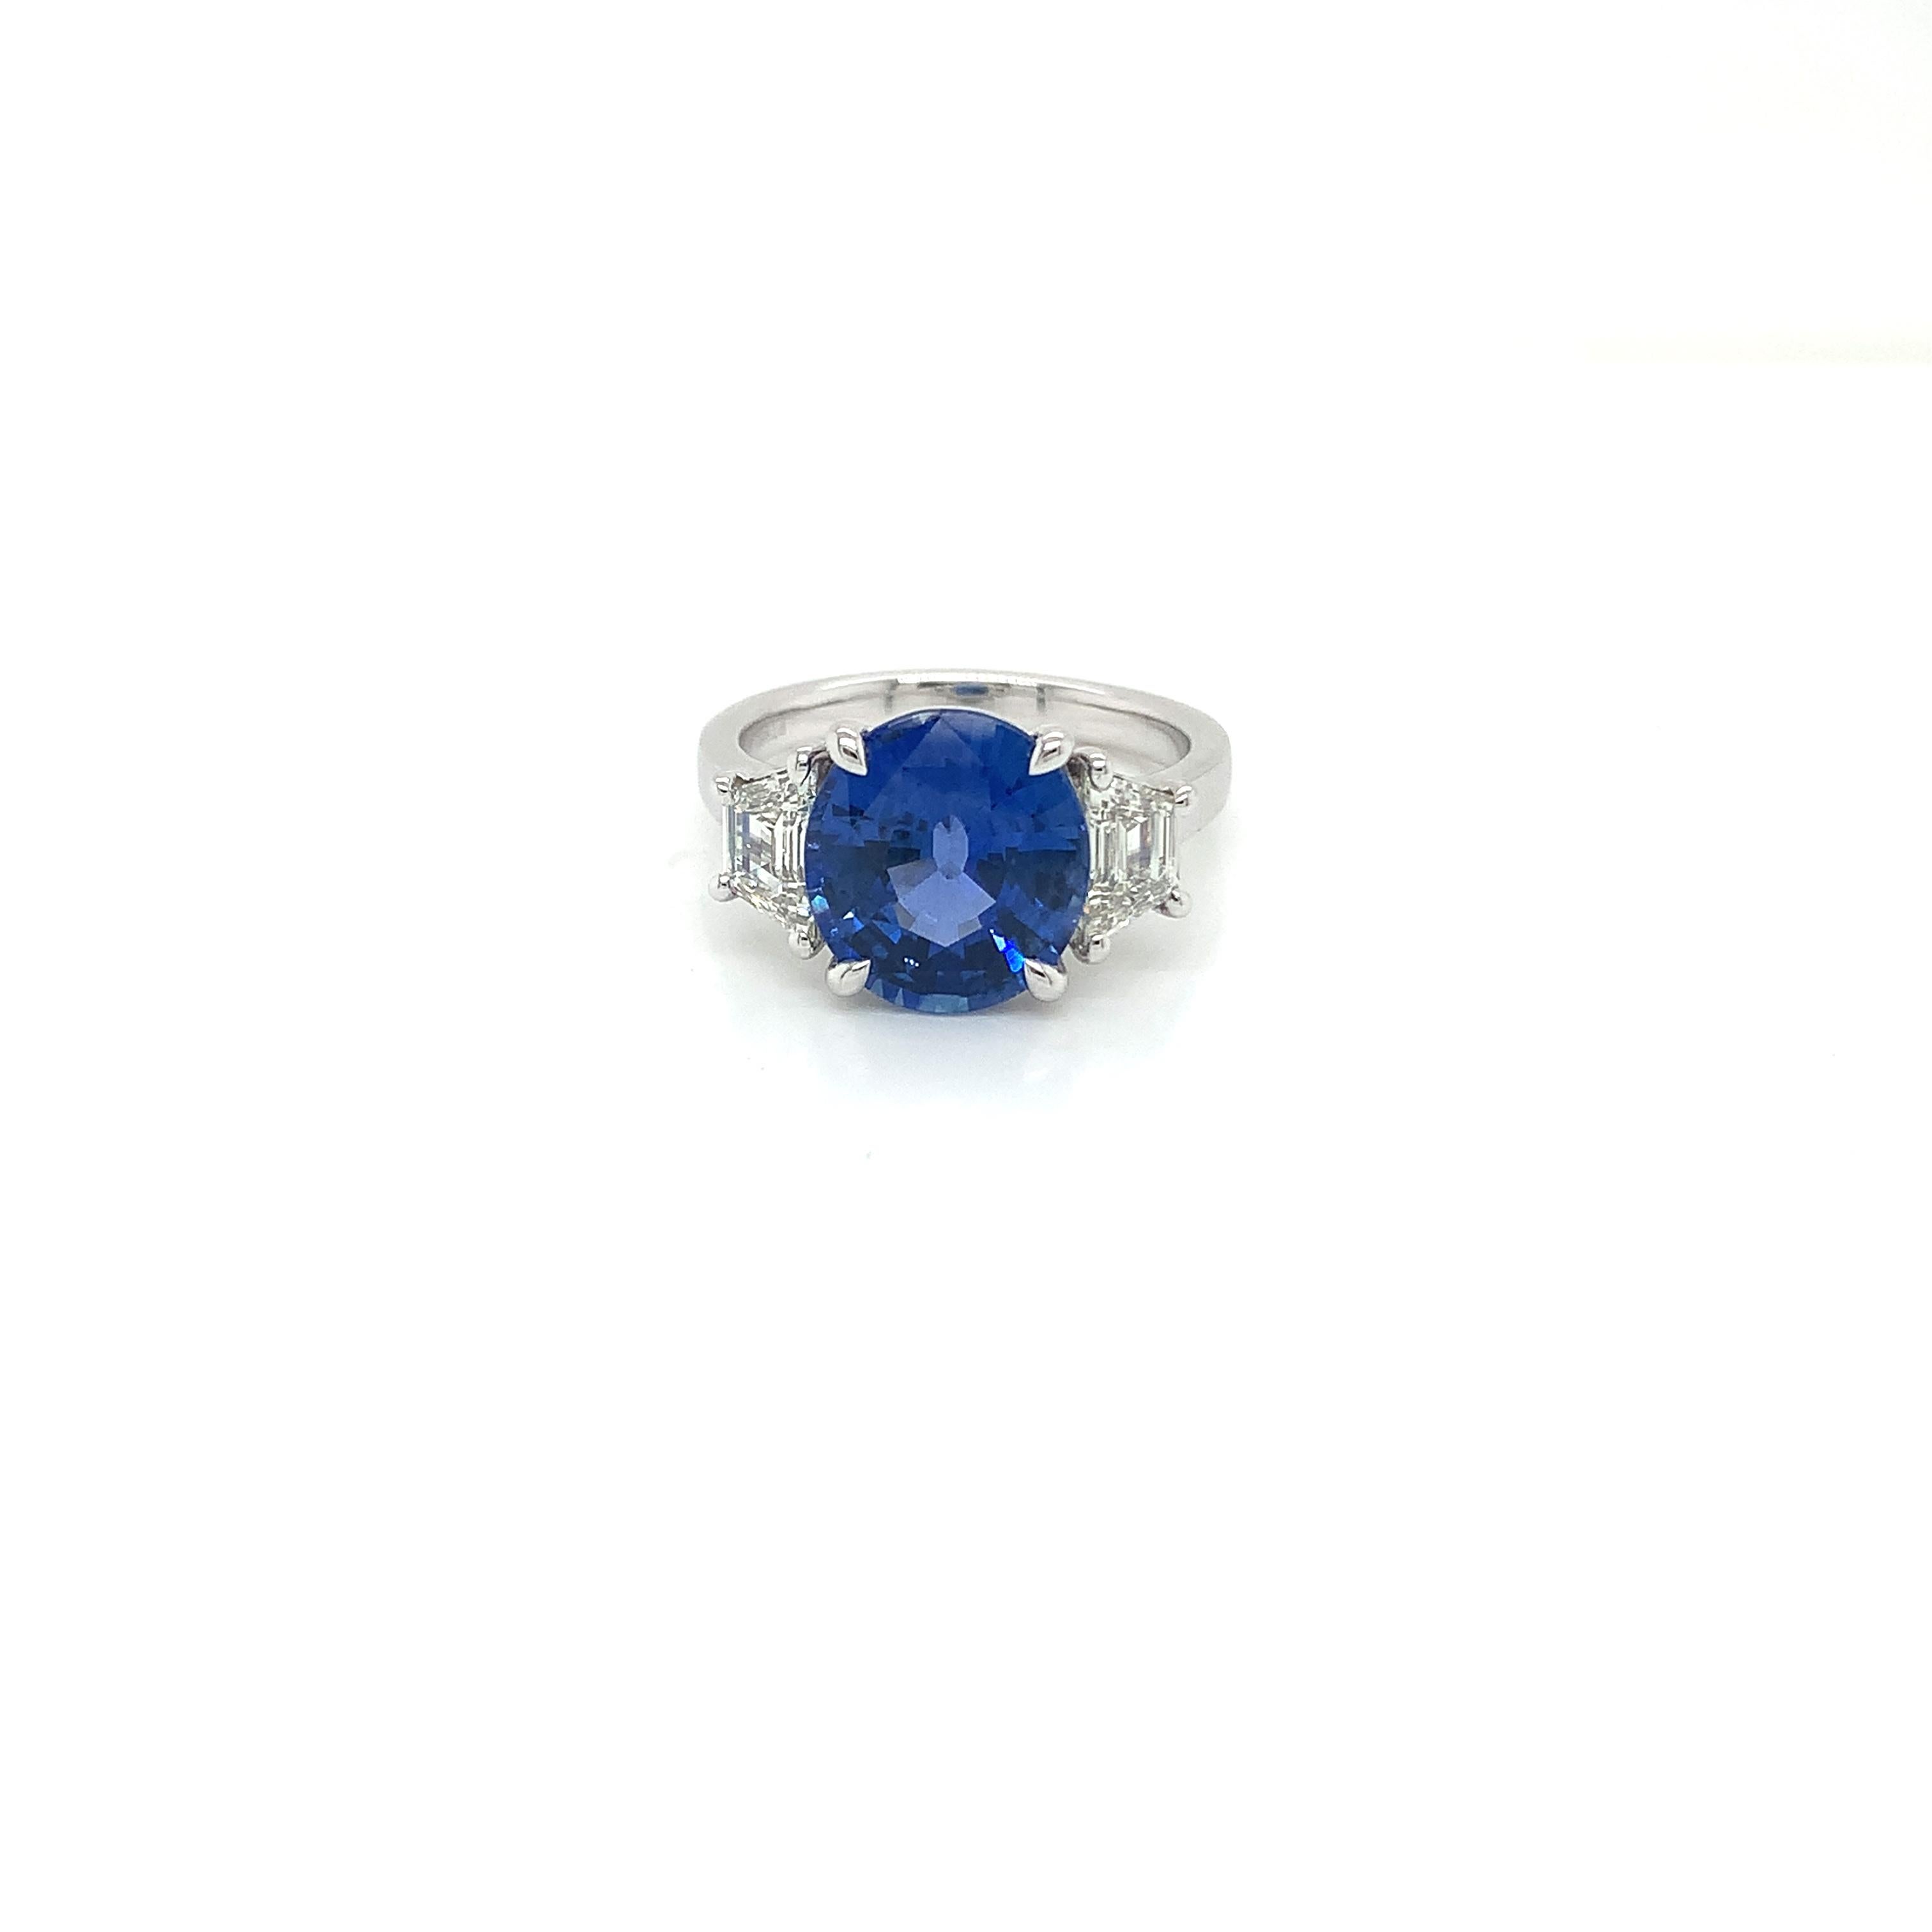 Certified Oval Ceylon Sapphire weighing 5.00 cts
Measuring (10.93x9.90x5.93) mm
2 Trapezoid diamonds weighing .86 cts
Measuring (6.4x3.6) mm
Set in Platinum ring

